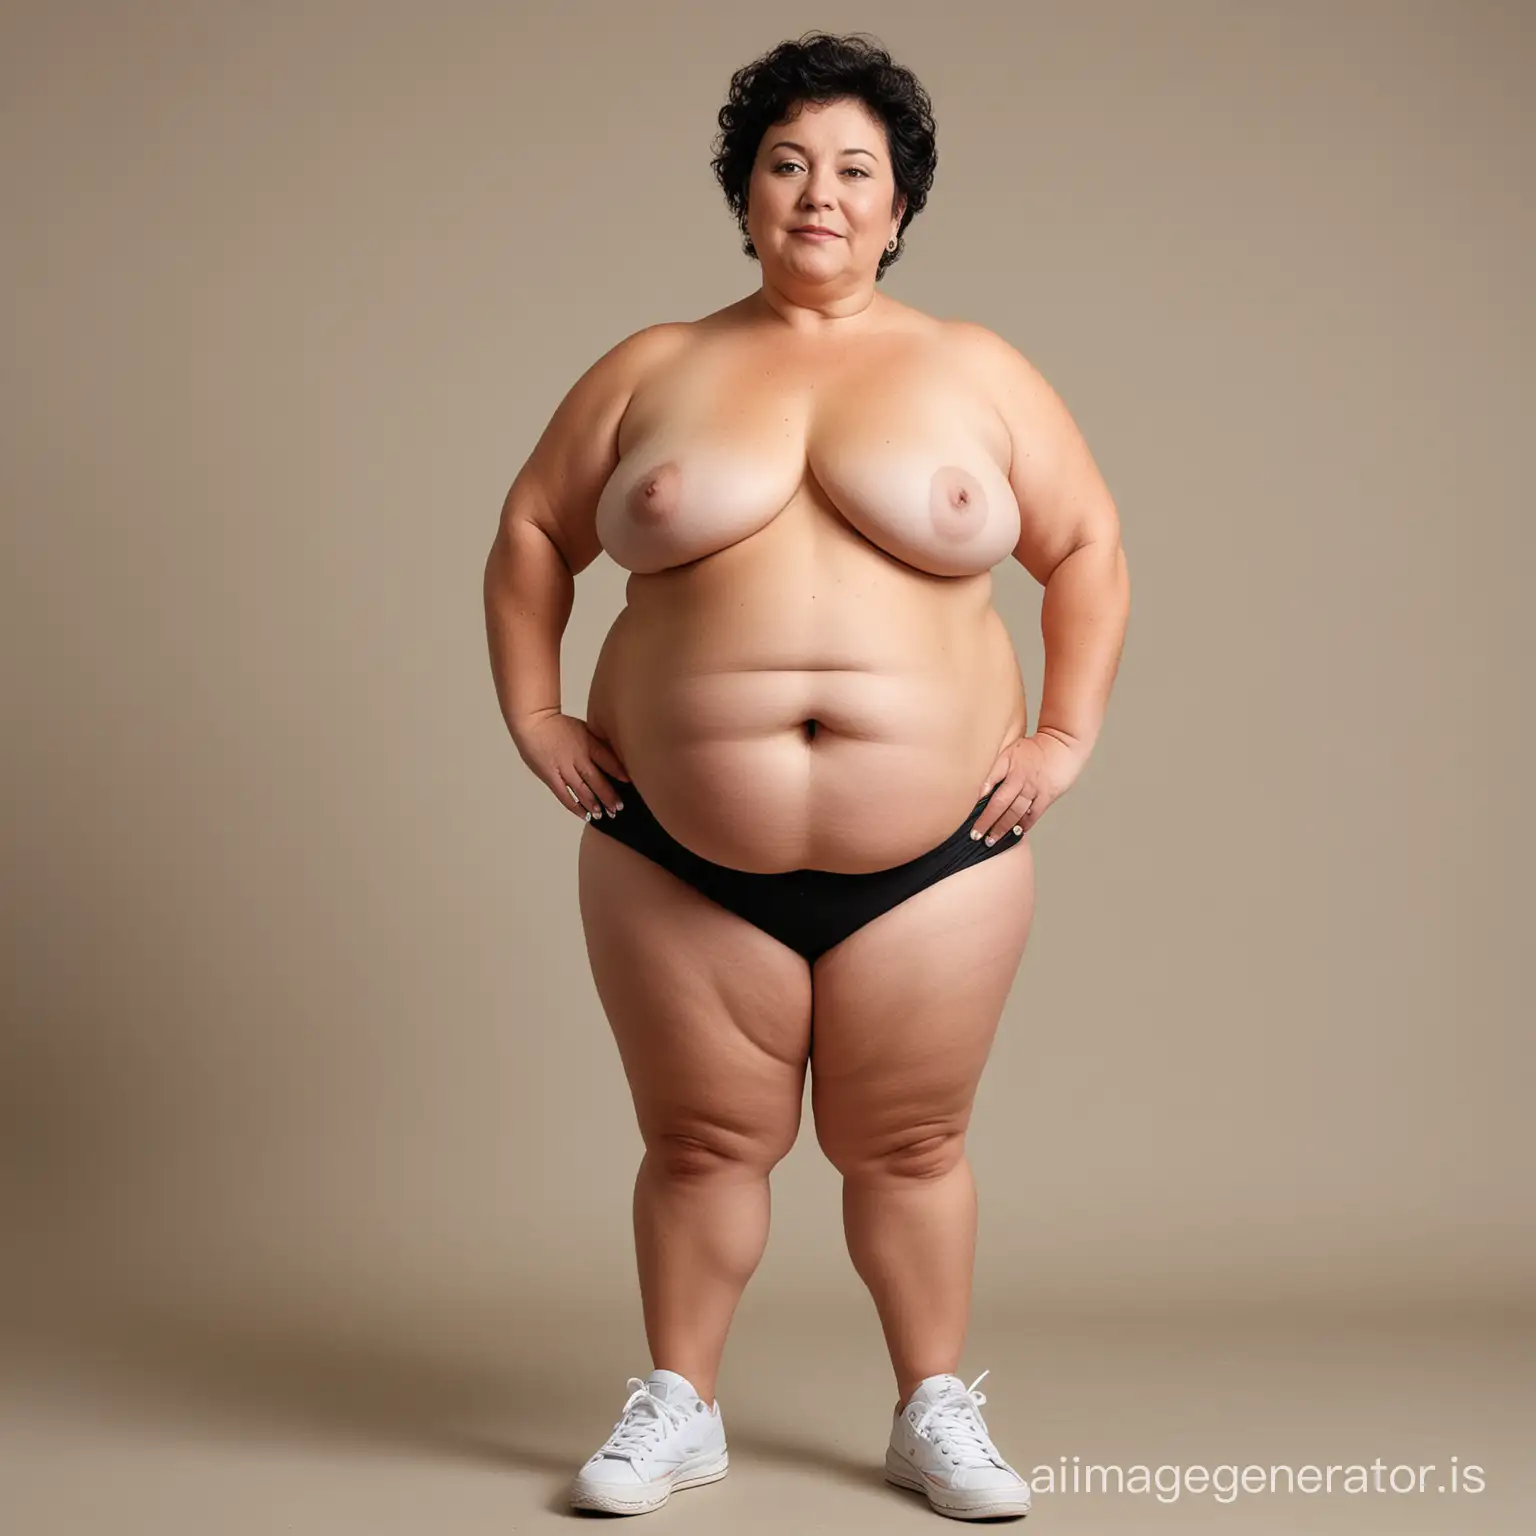 Naked bbw, age 70, short, weight 110kg., big and fat belly, big hips and fat legs, fat wrists. Chubby arms. Black hairs. Standing. Wears sneakers. Short neck, 